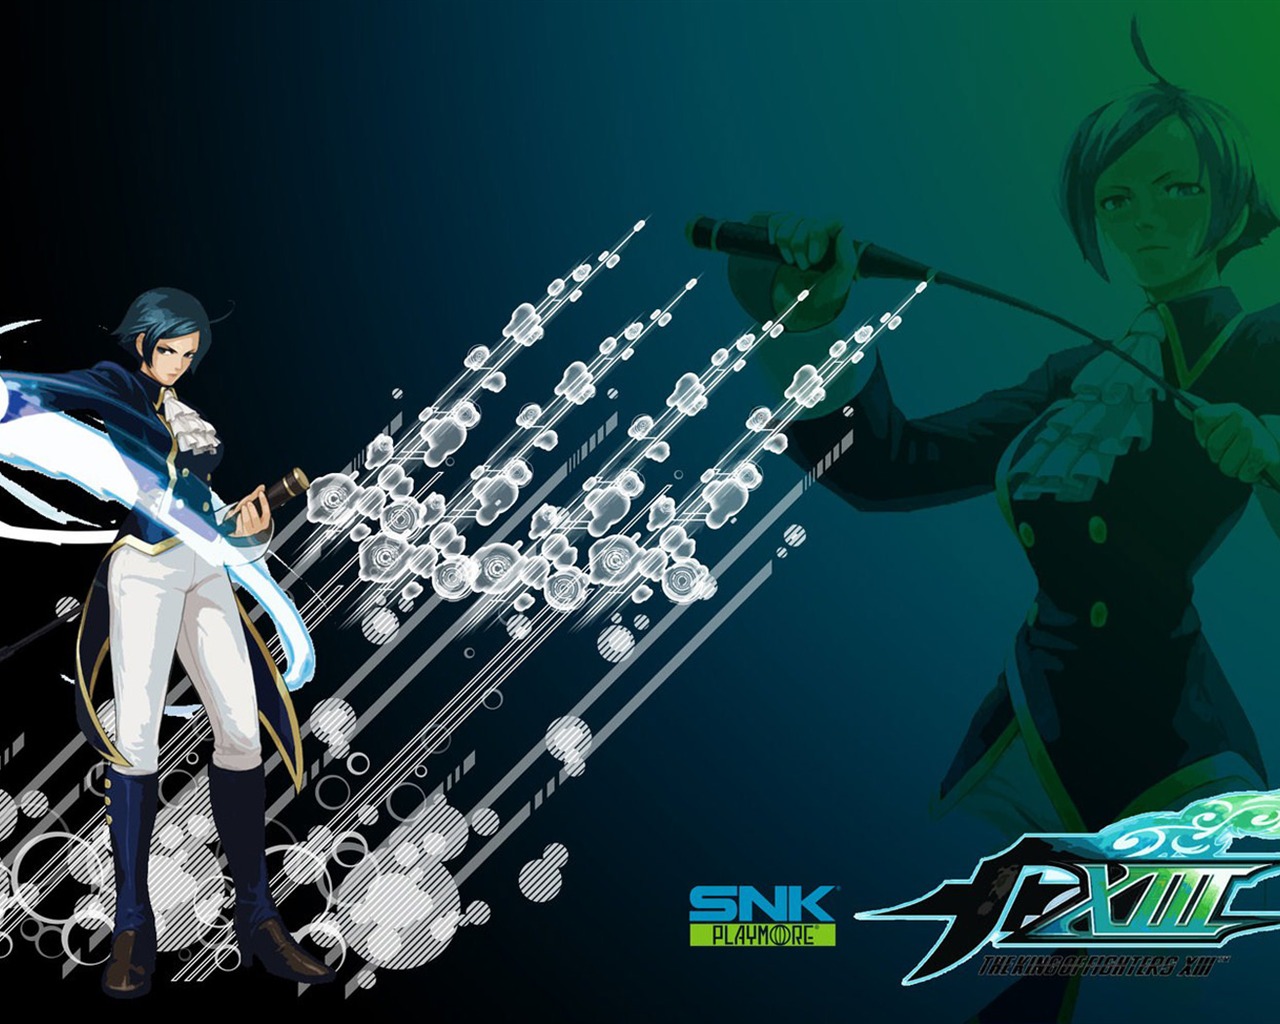 Le roi de wallpapers Fighters XIII #11 - 1280x1024